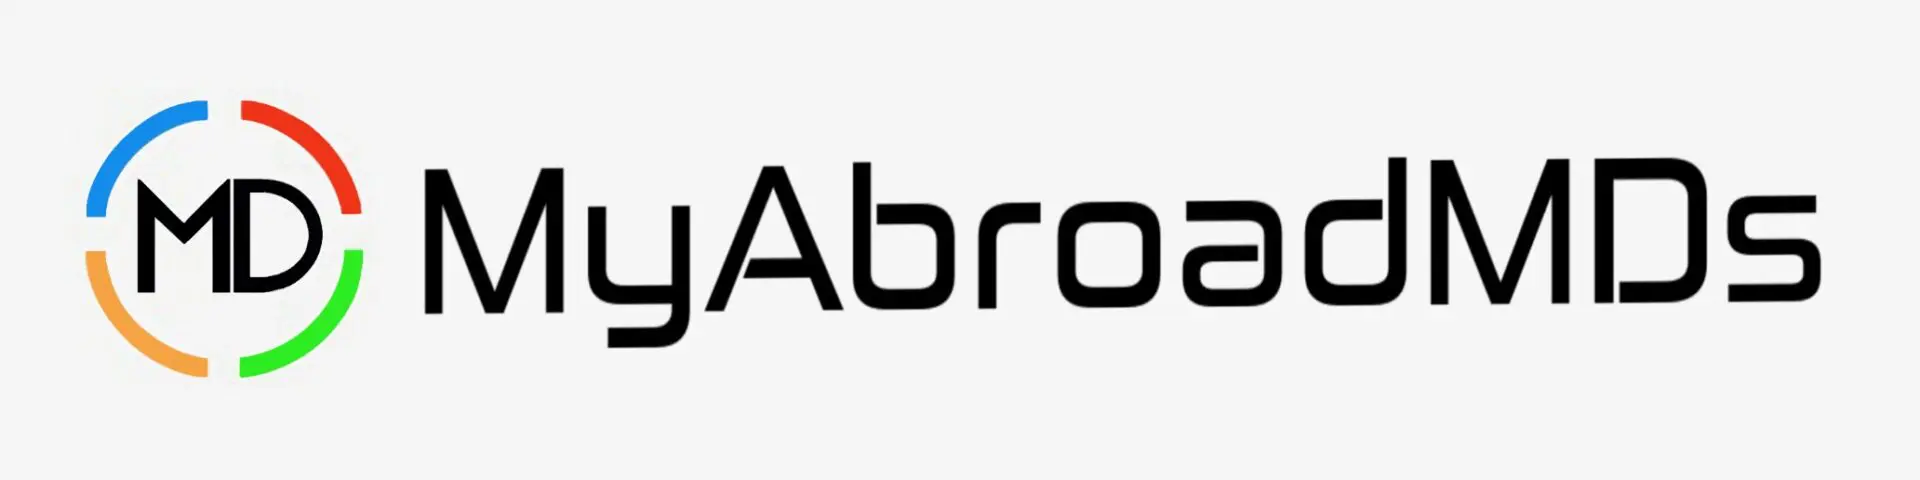 A black and white image of the logo for abroad.